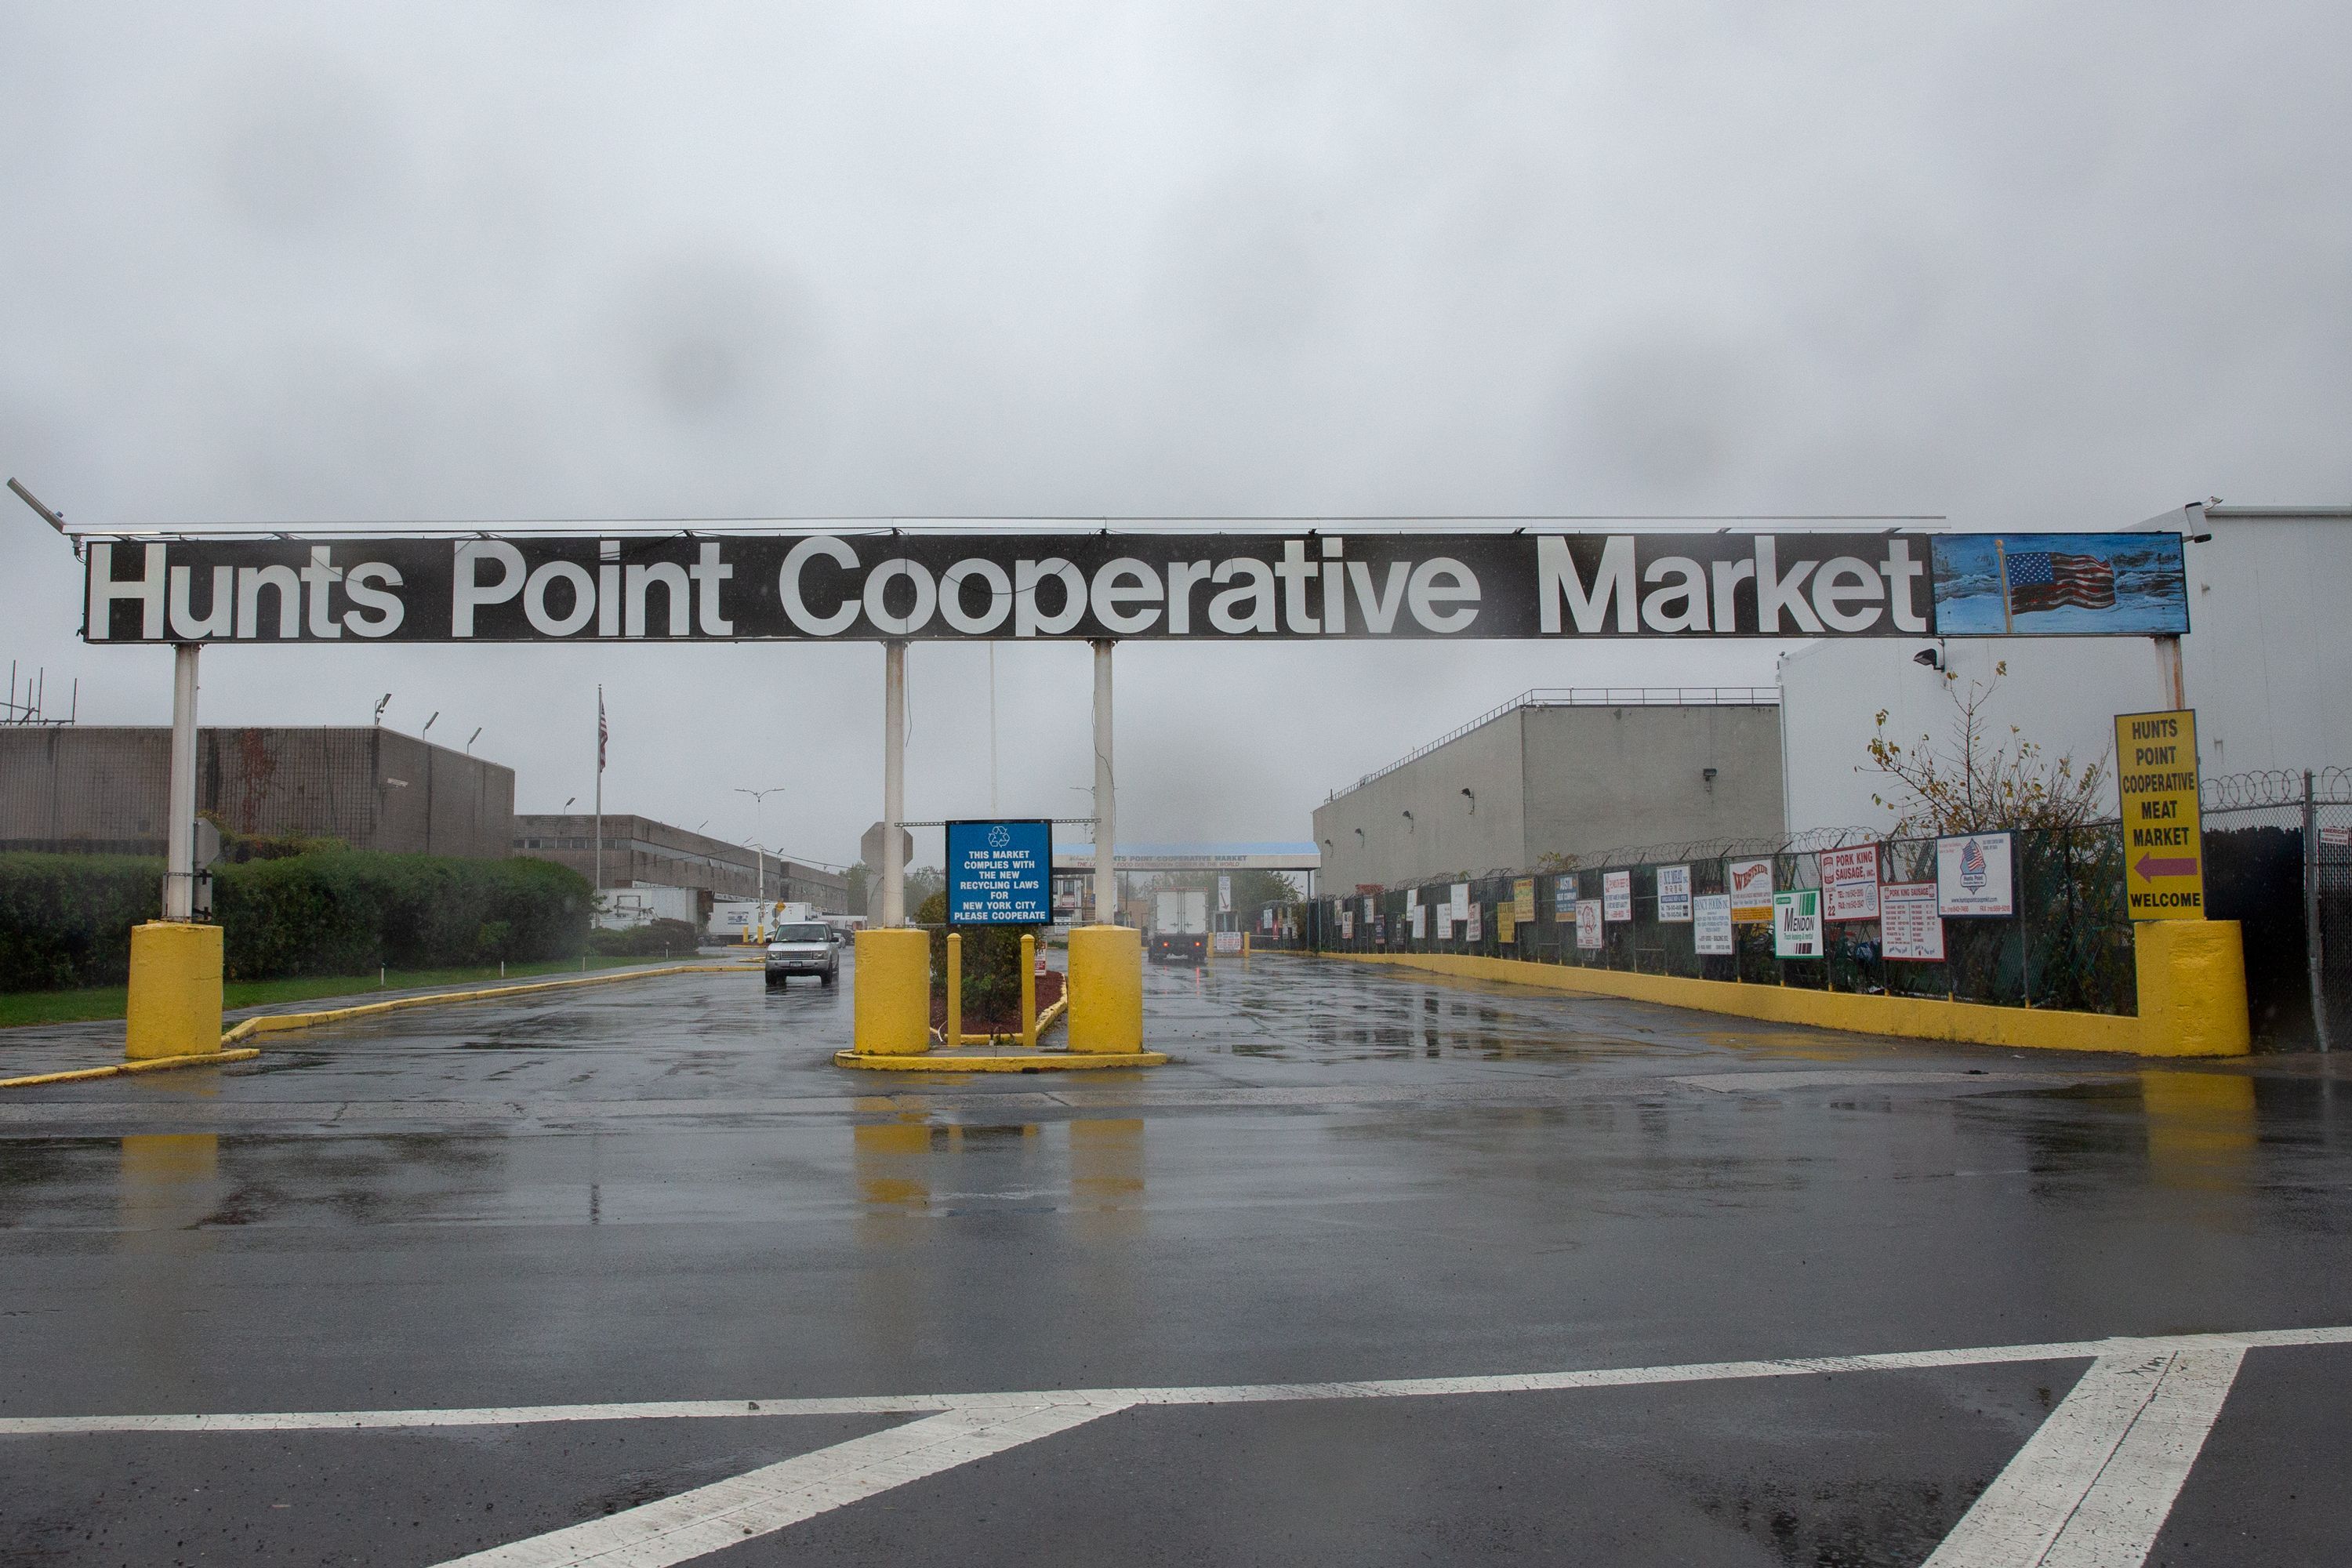 The Hunts Point Cooperative Market in The Bronx is the largest of its kind in the world.